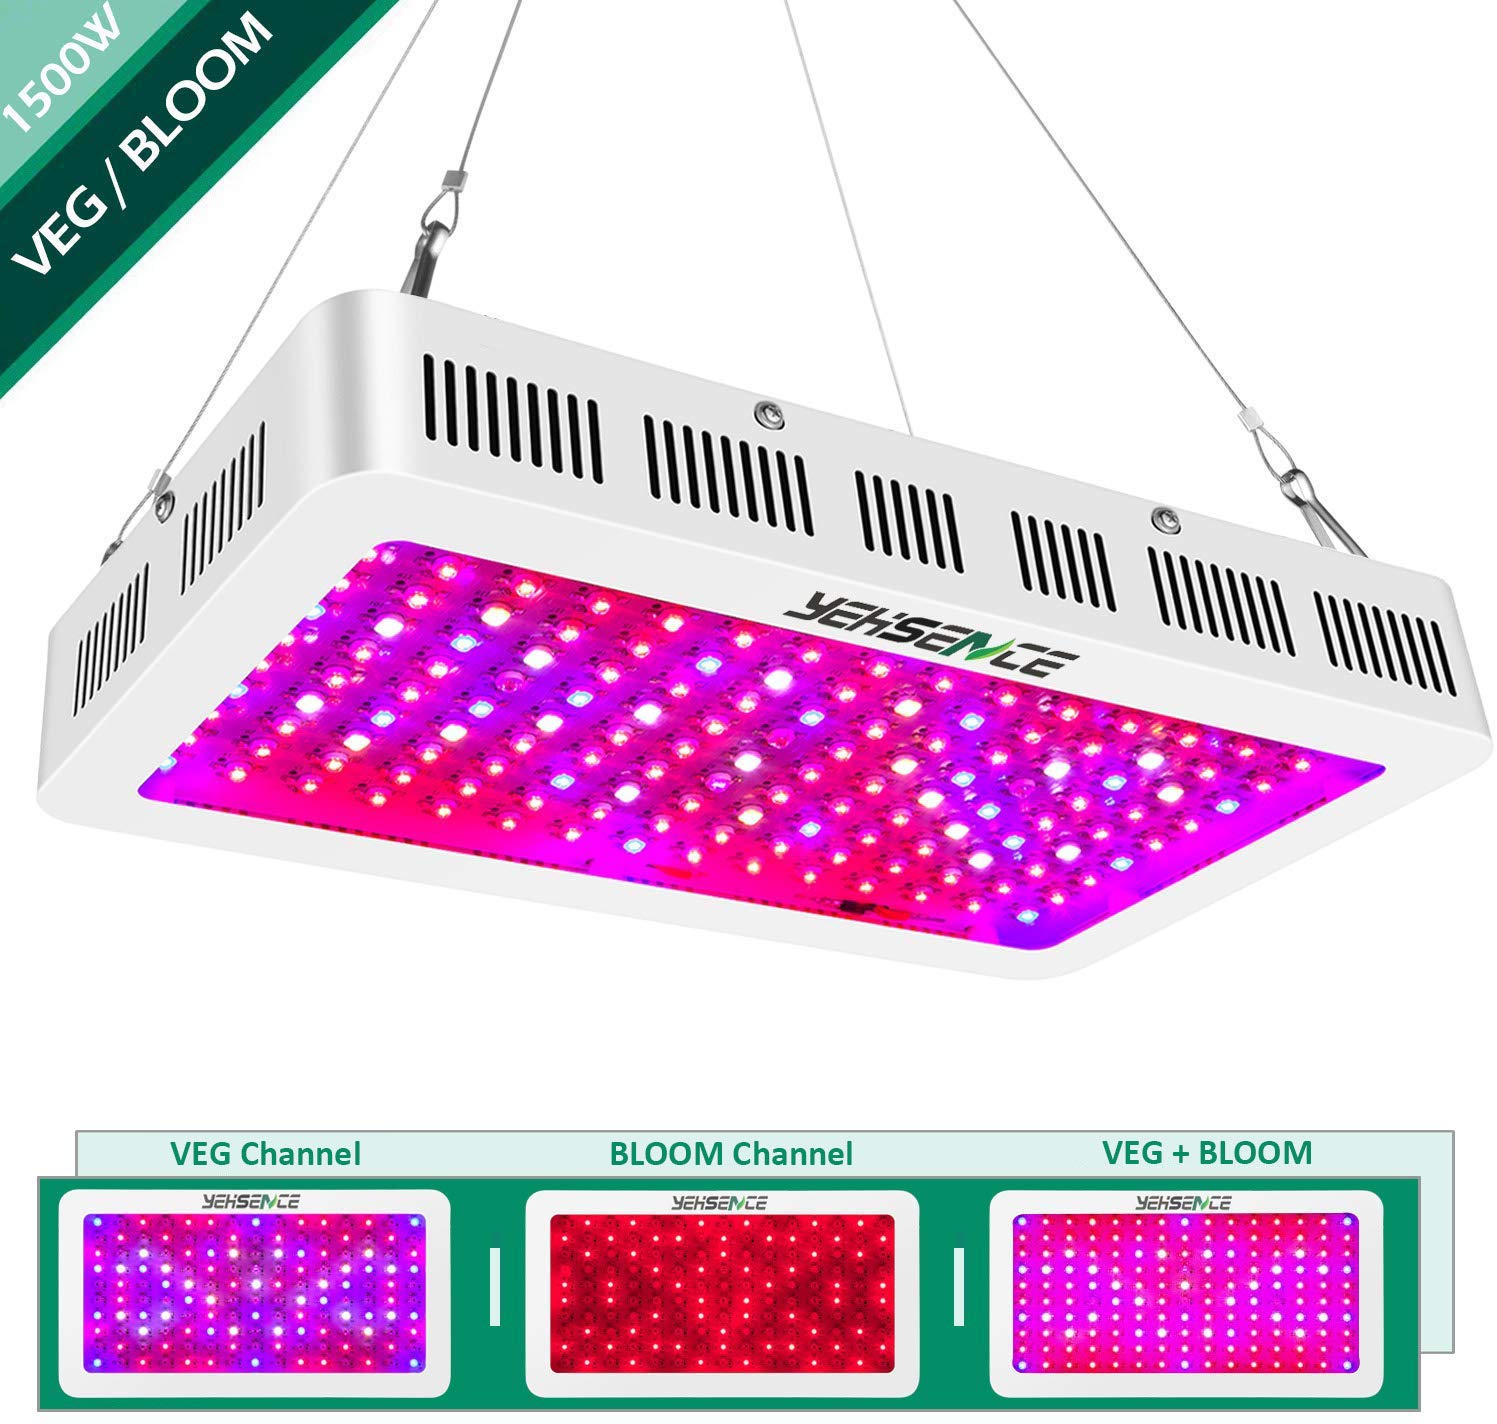 Yehsence 1500w LED Grow Light with Bloom and Veg Switch, Triple-Chips (15W LED) LED Plant Growing Lamp Full Spectrum with Daisy Chained Design for Professional Greenhouse Hydroponic Indoor Plants